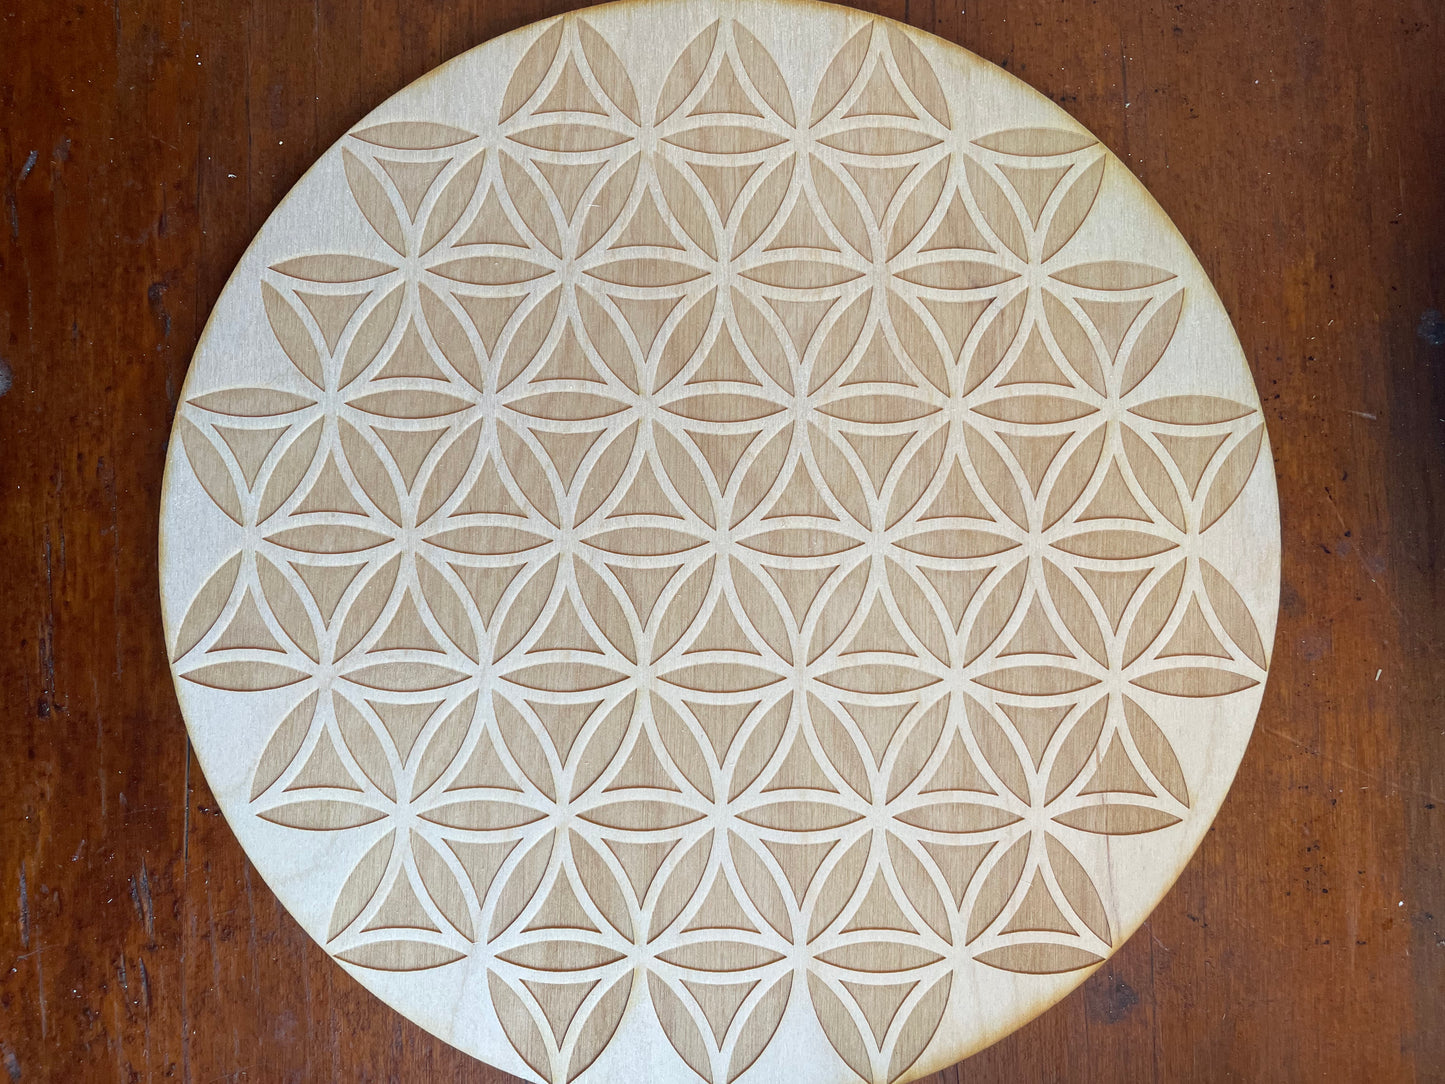 Inverted Flower of Life Grid - 10 inch